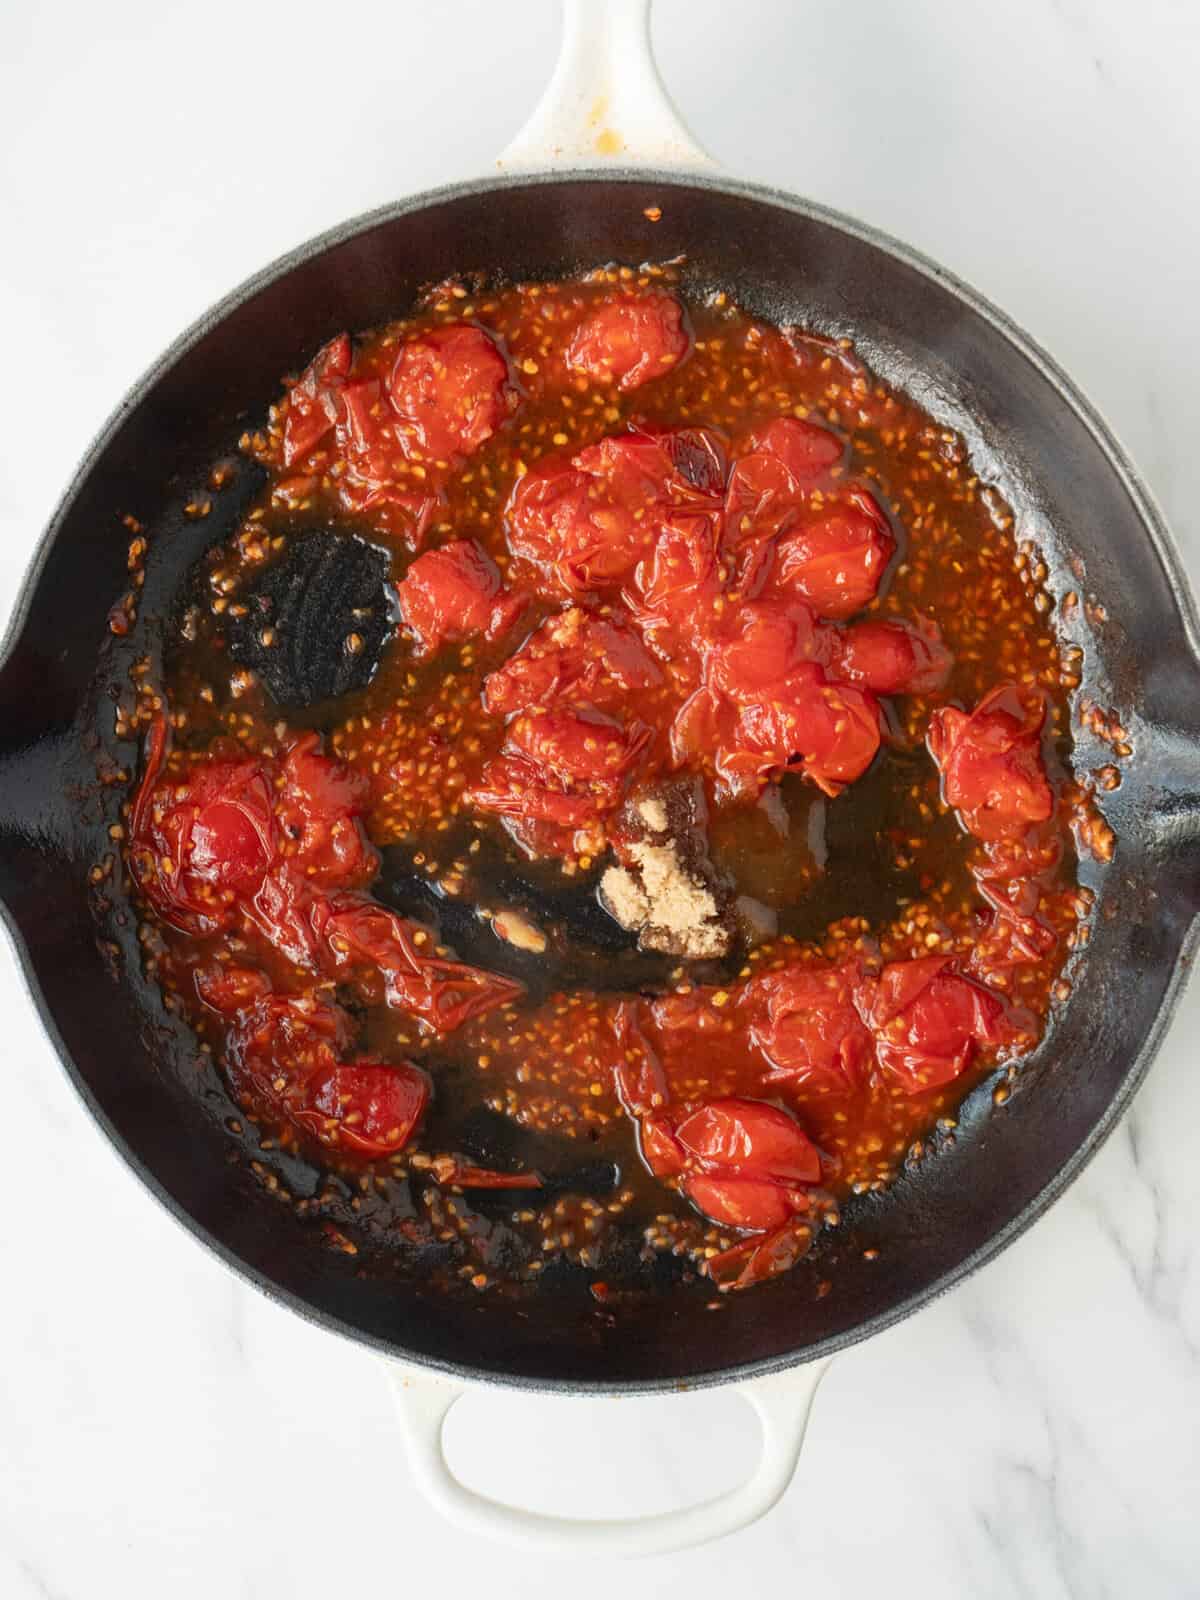 A non stick pan with cherry tomatoes being cooked, partially blistered and smashed with garlic just added.